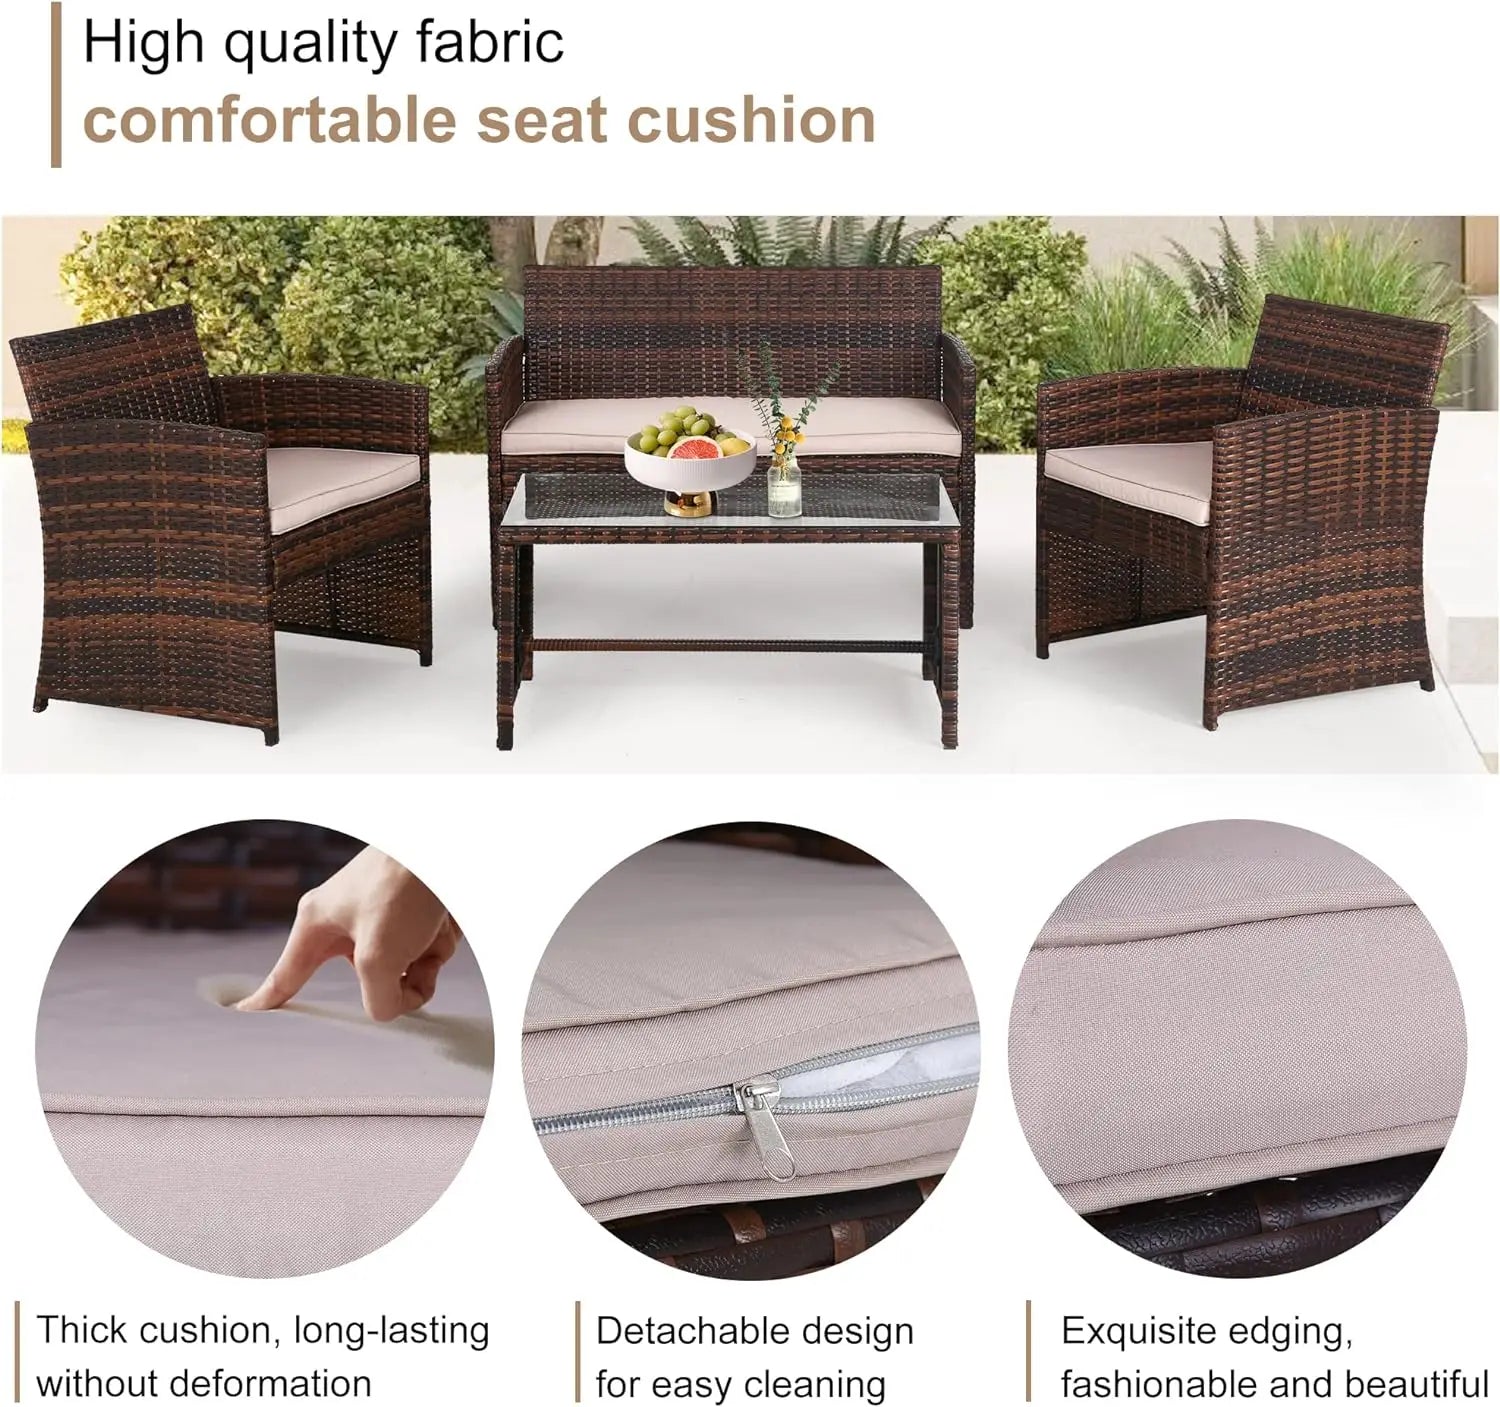 4 Pieces, Outdoor Patio Furniture with wicker chairs and table. - My Store